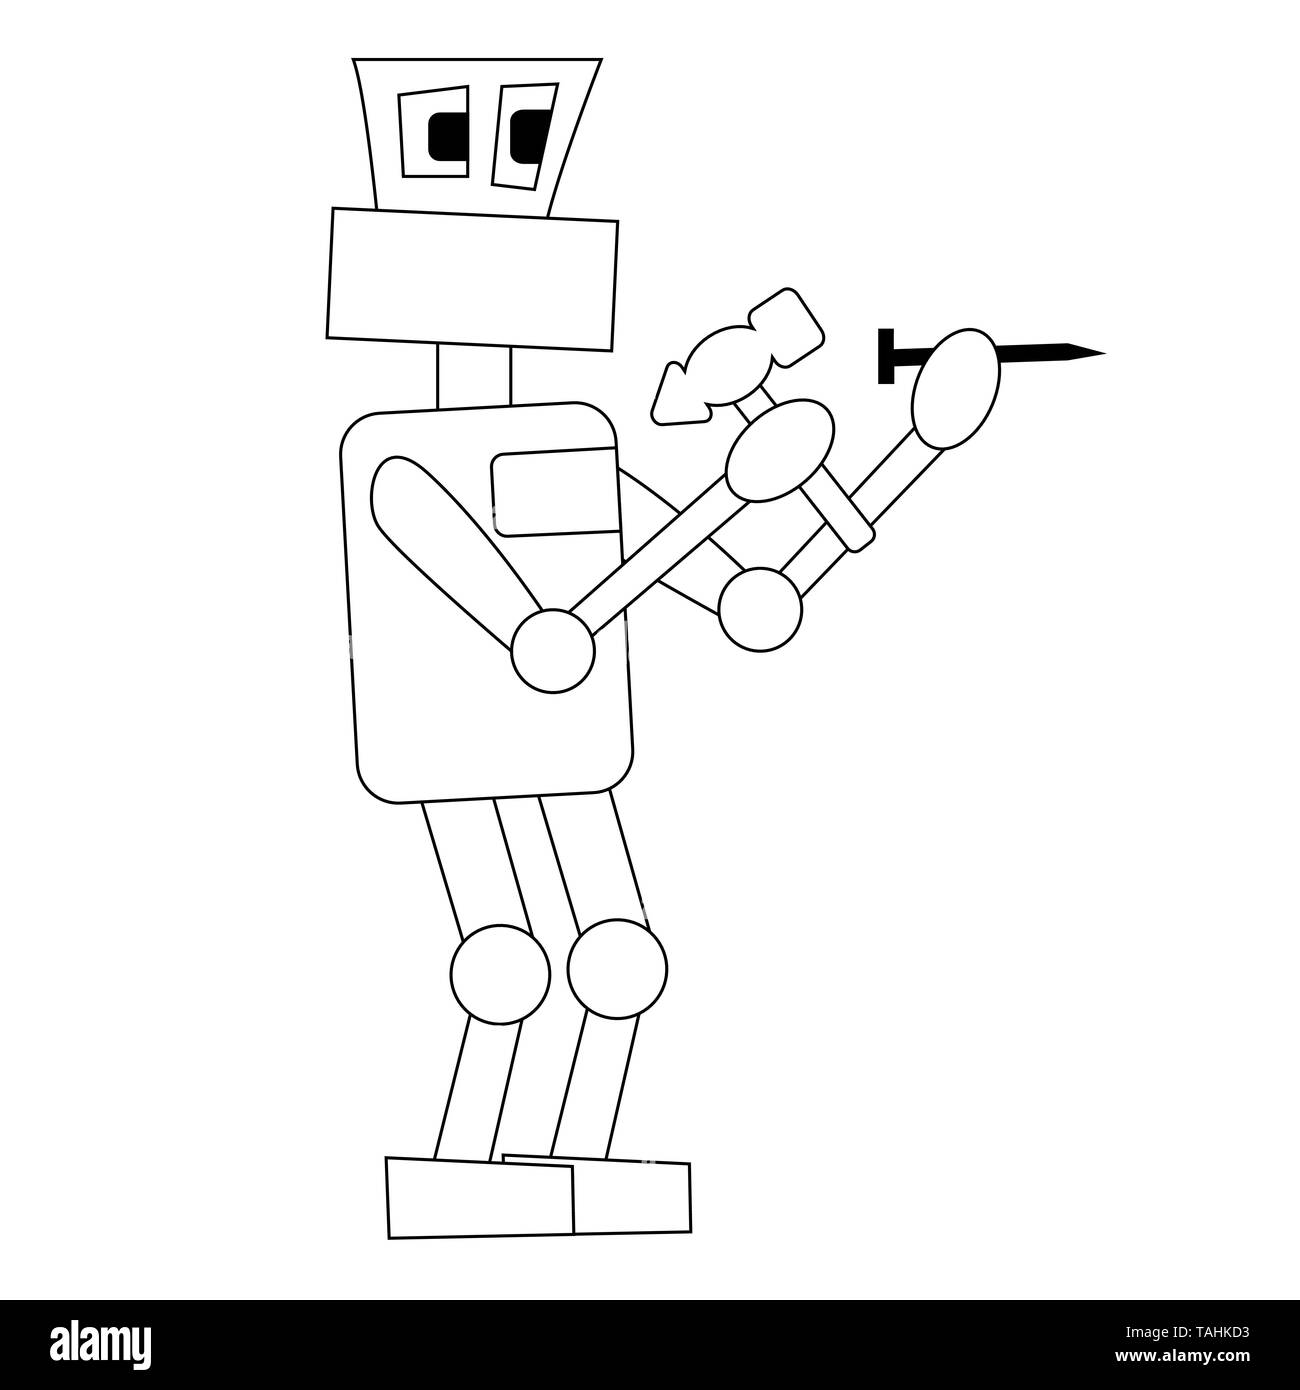 the robot is hammering a nail at work. Isolated outline stock vector illustration Stock Vector